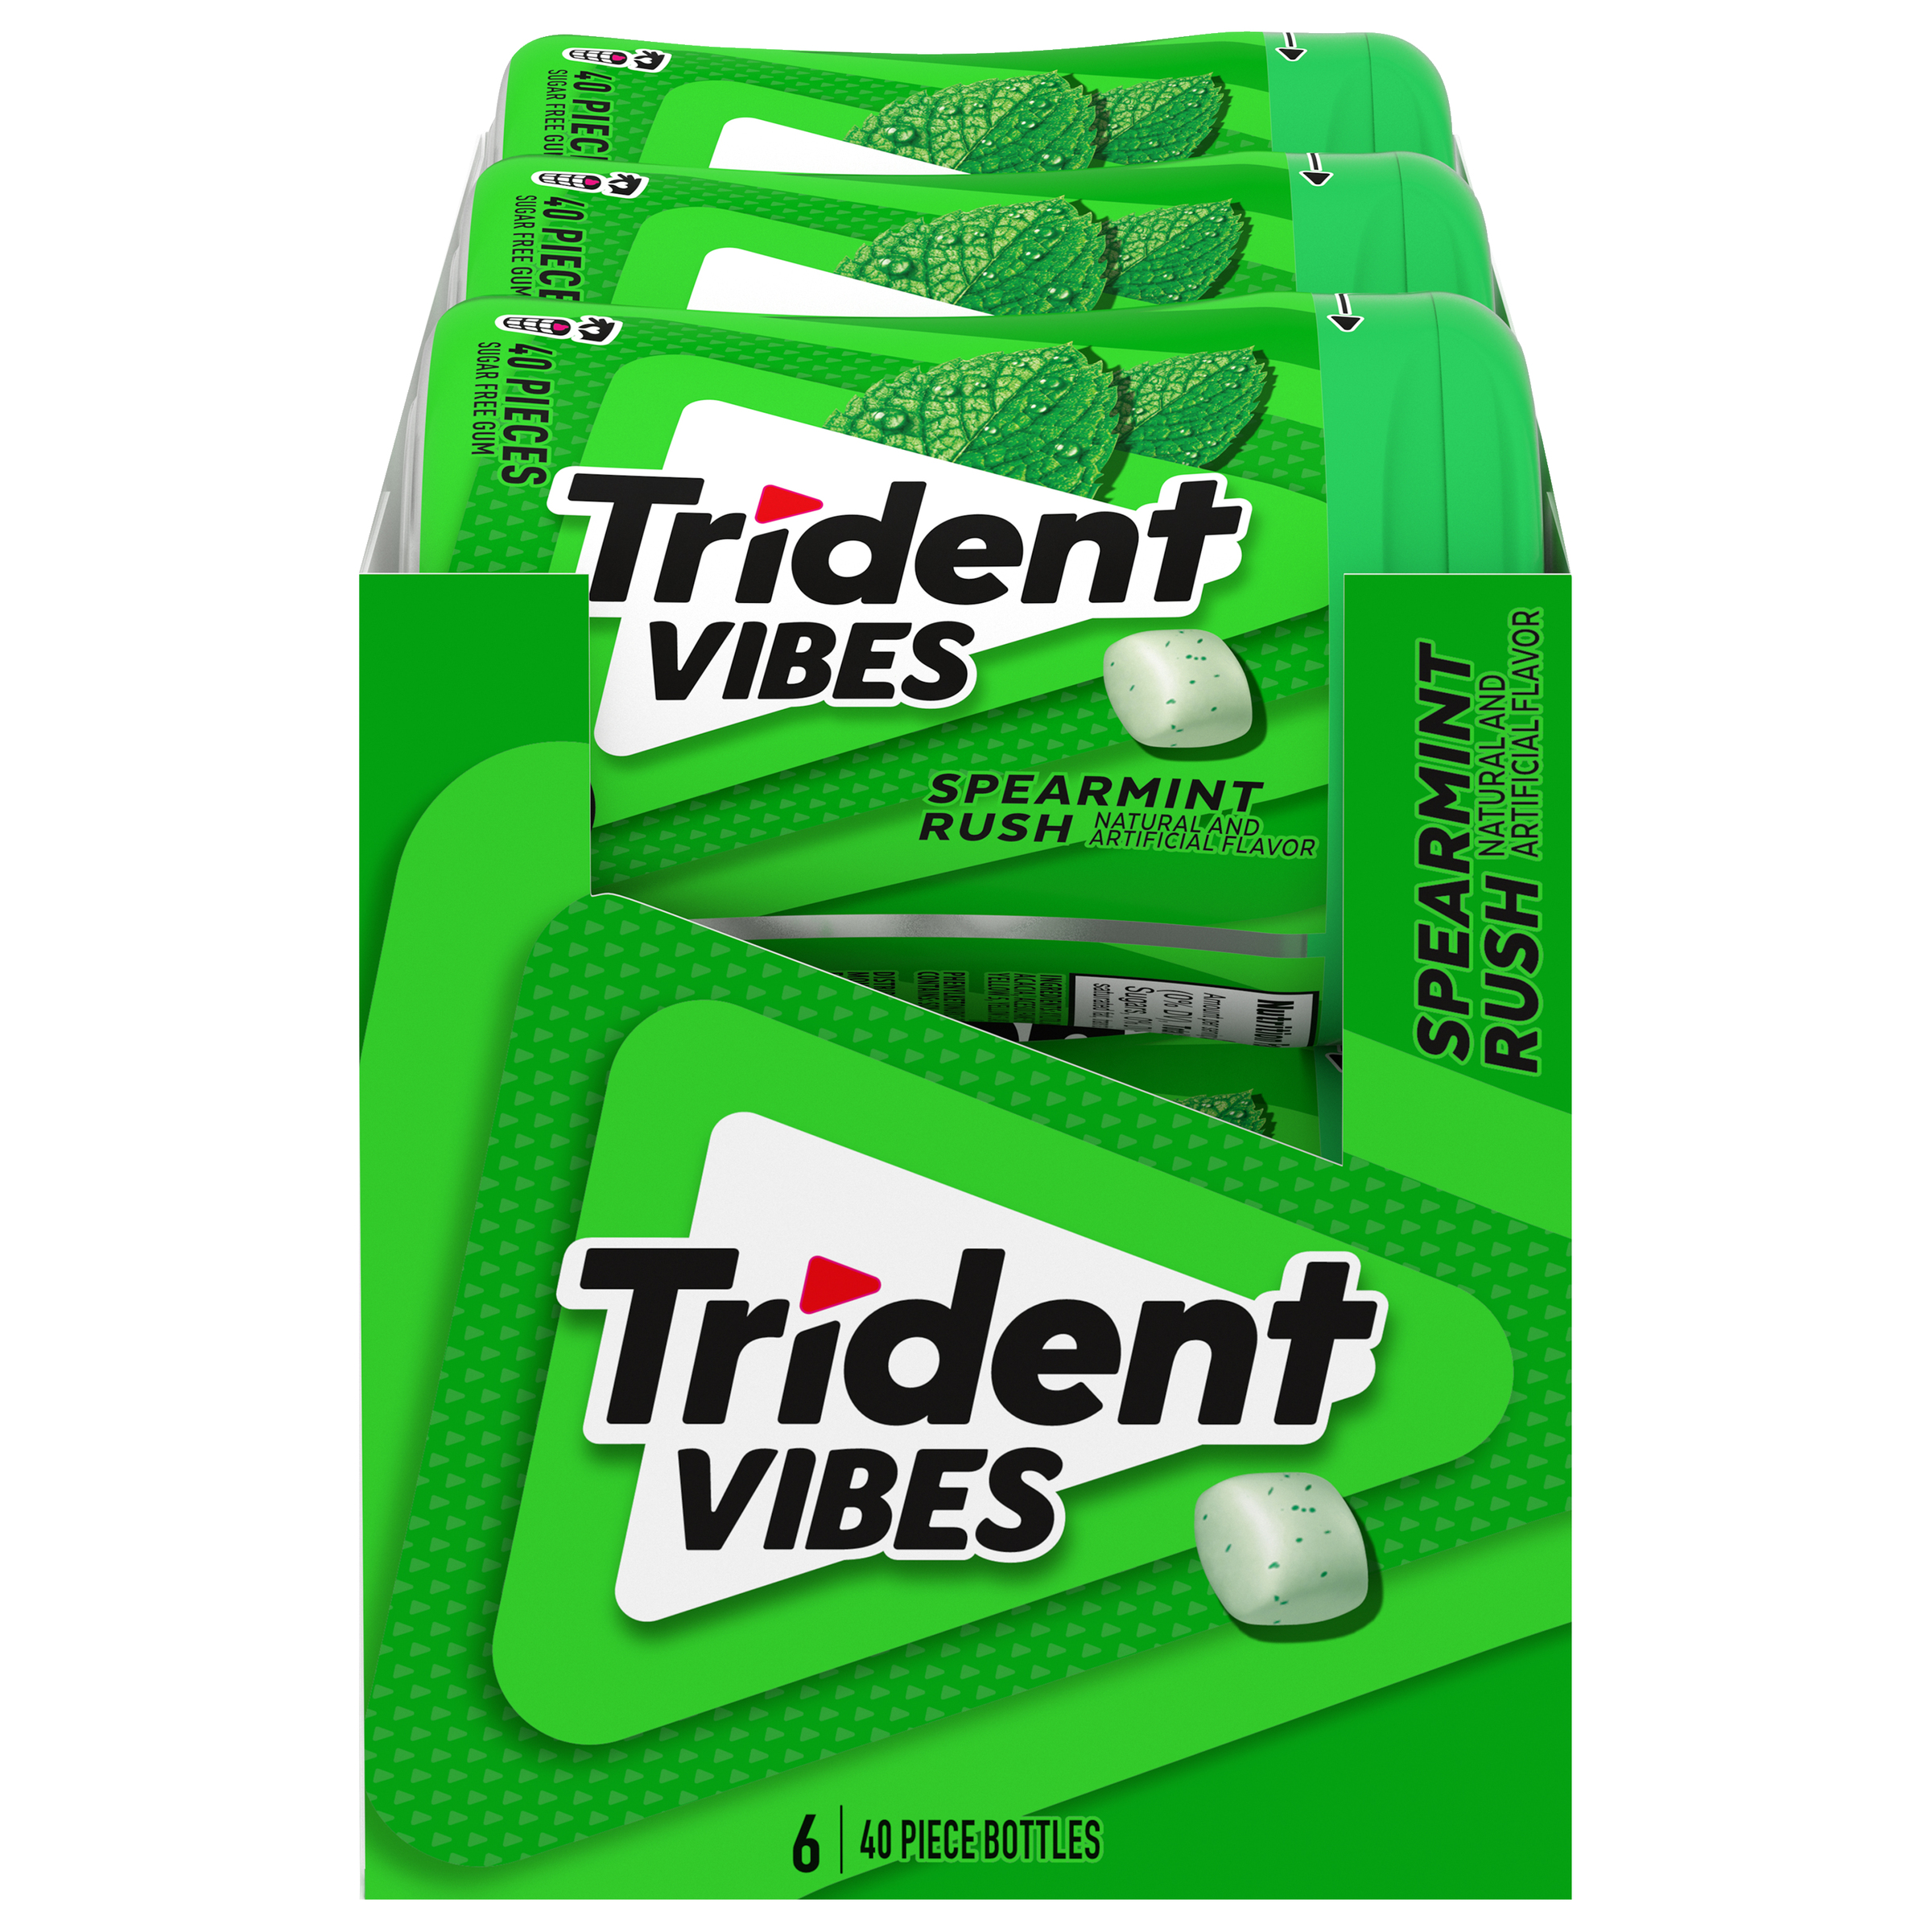 Trident Vibes Spearmint Rush Sugar Free Gum, 6 Bottles of 40 Pieces (240 Total Pieces)-0